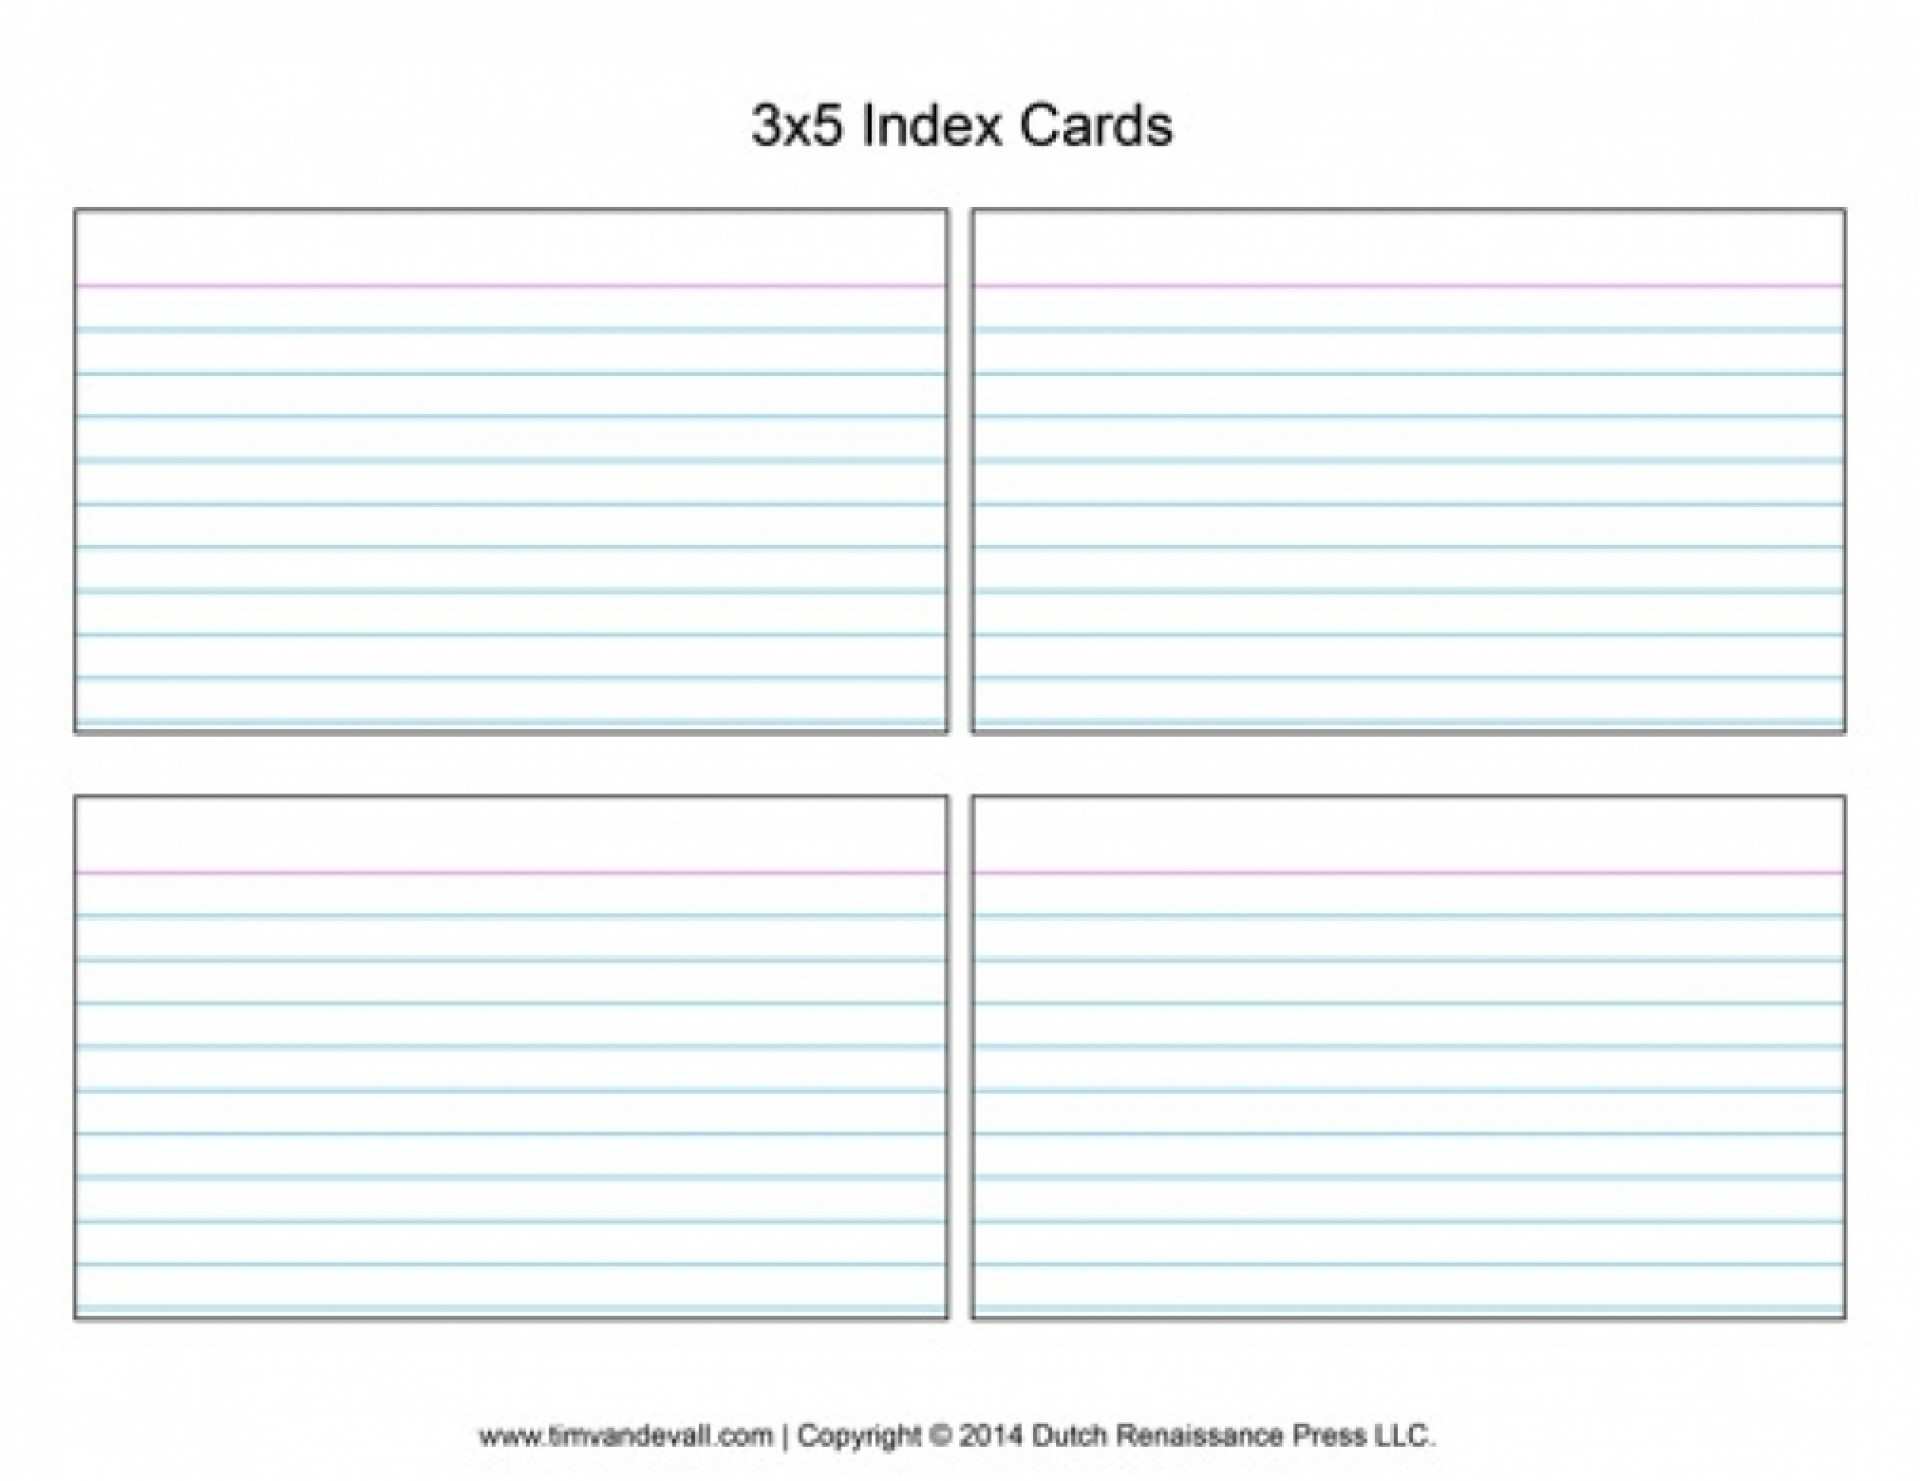 22 Creative Index Card 22X22 Template Microsoft Word Photo with Intended For Word Template For 3x5 Index Cards